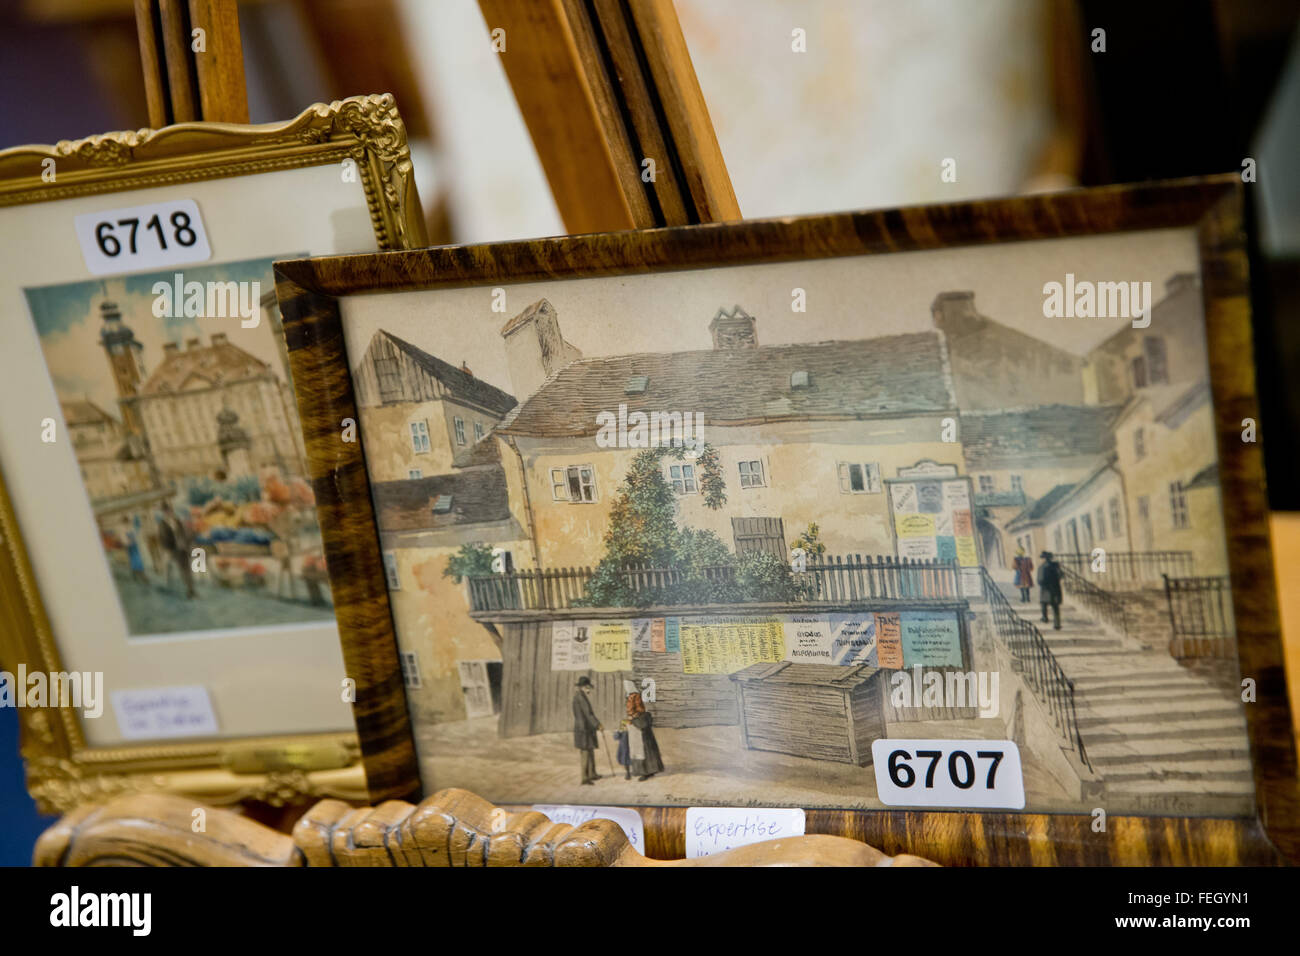 Nuremberg, Germany. 4th Feb, 2016. The water colour paintings 'Freyung Wien' (l) and 'VI. Ratzenstadl Magdalenenstr. 74', which are both attributed to Adolf Hitler as author, are presented at an auctioneer in Nuremberg, Germany, 4 February 2016. A total of 29 paintings and drawings, attributed to Adolf Hitler, have been auctioned off at Weidler actioneers in Nuremberg on 6 February 2016. Photo: Daniel Karmann/dpa/Alamy Live News Stock Photo